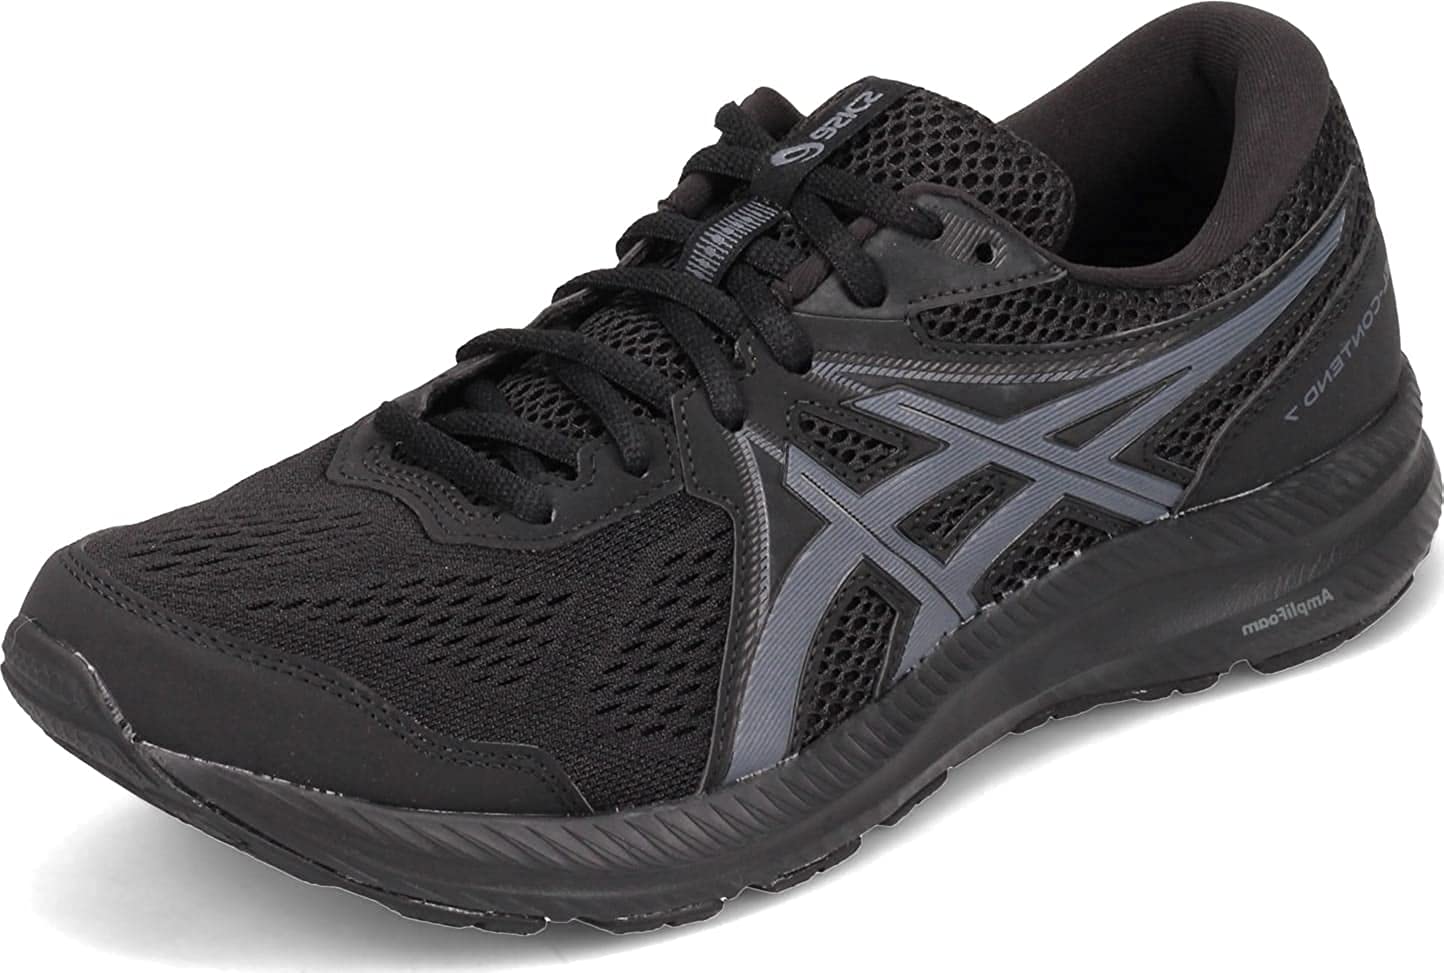 Gel contend 7. ASICS Gel contend 7. ASICS men's Gel-contend 7 Running Shoe. Gel-contend 7 Carrier Grey/Classic Red.